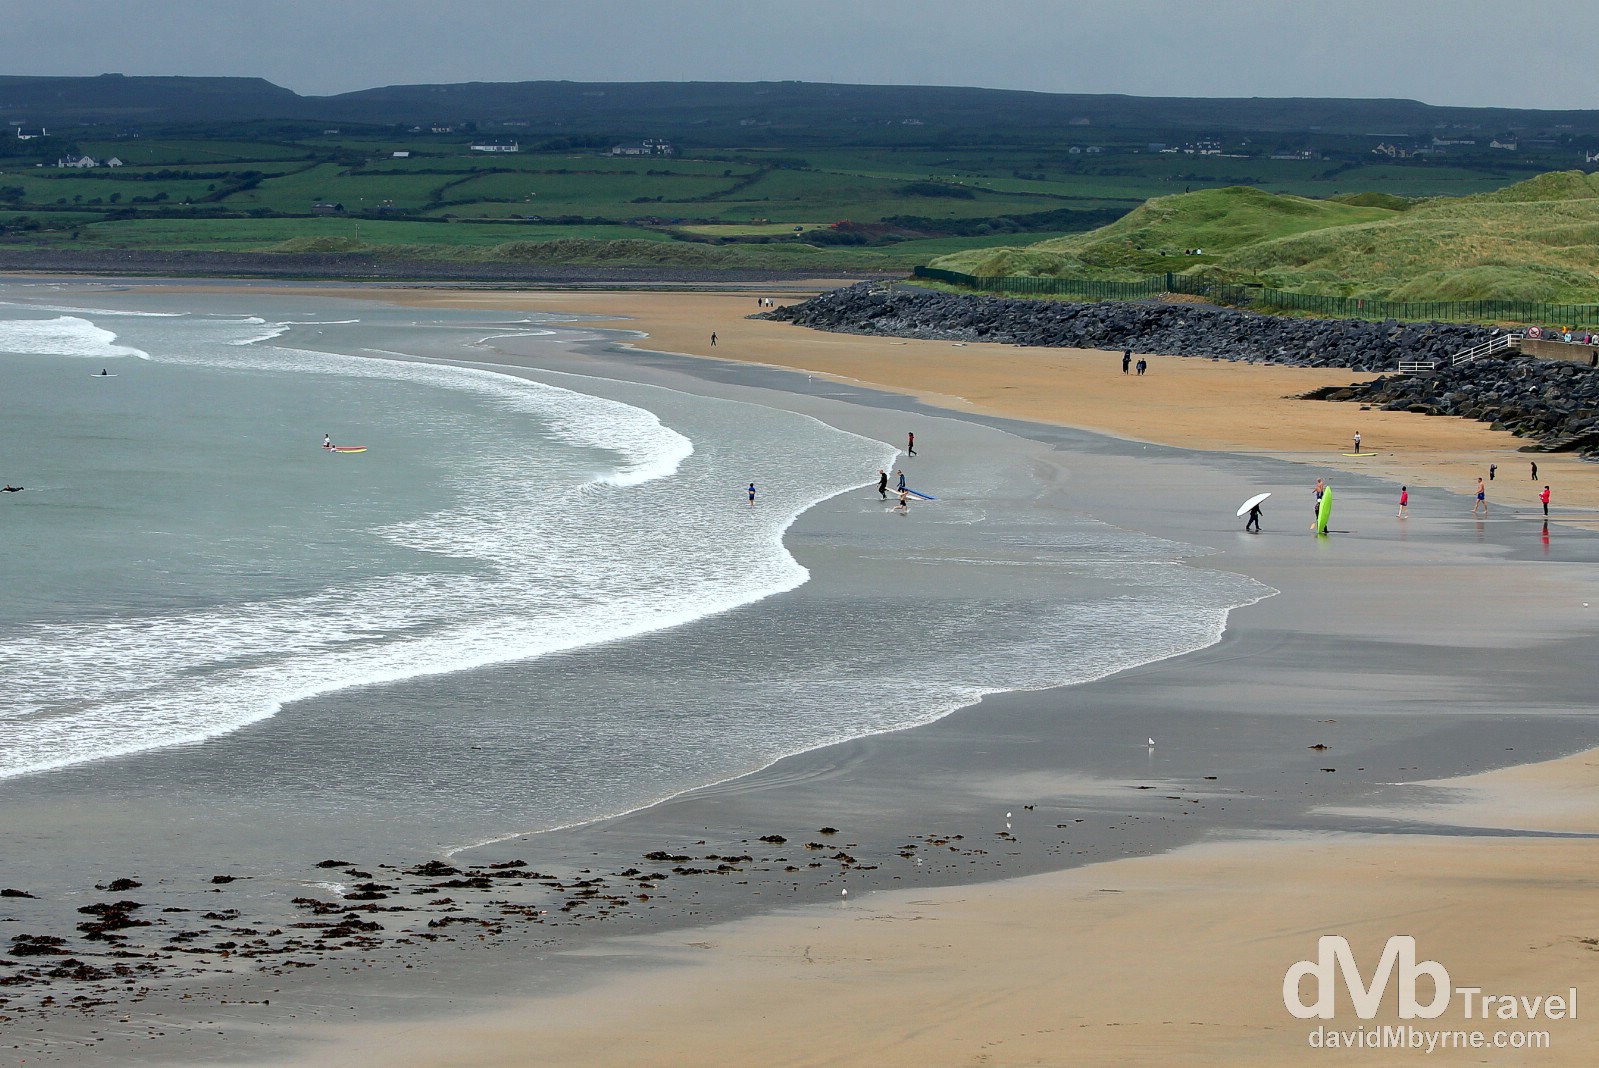 Surfers in the water of the beach in Lahinch. Co. Kerry, Ireland. August 27, 2014.